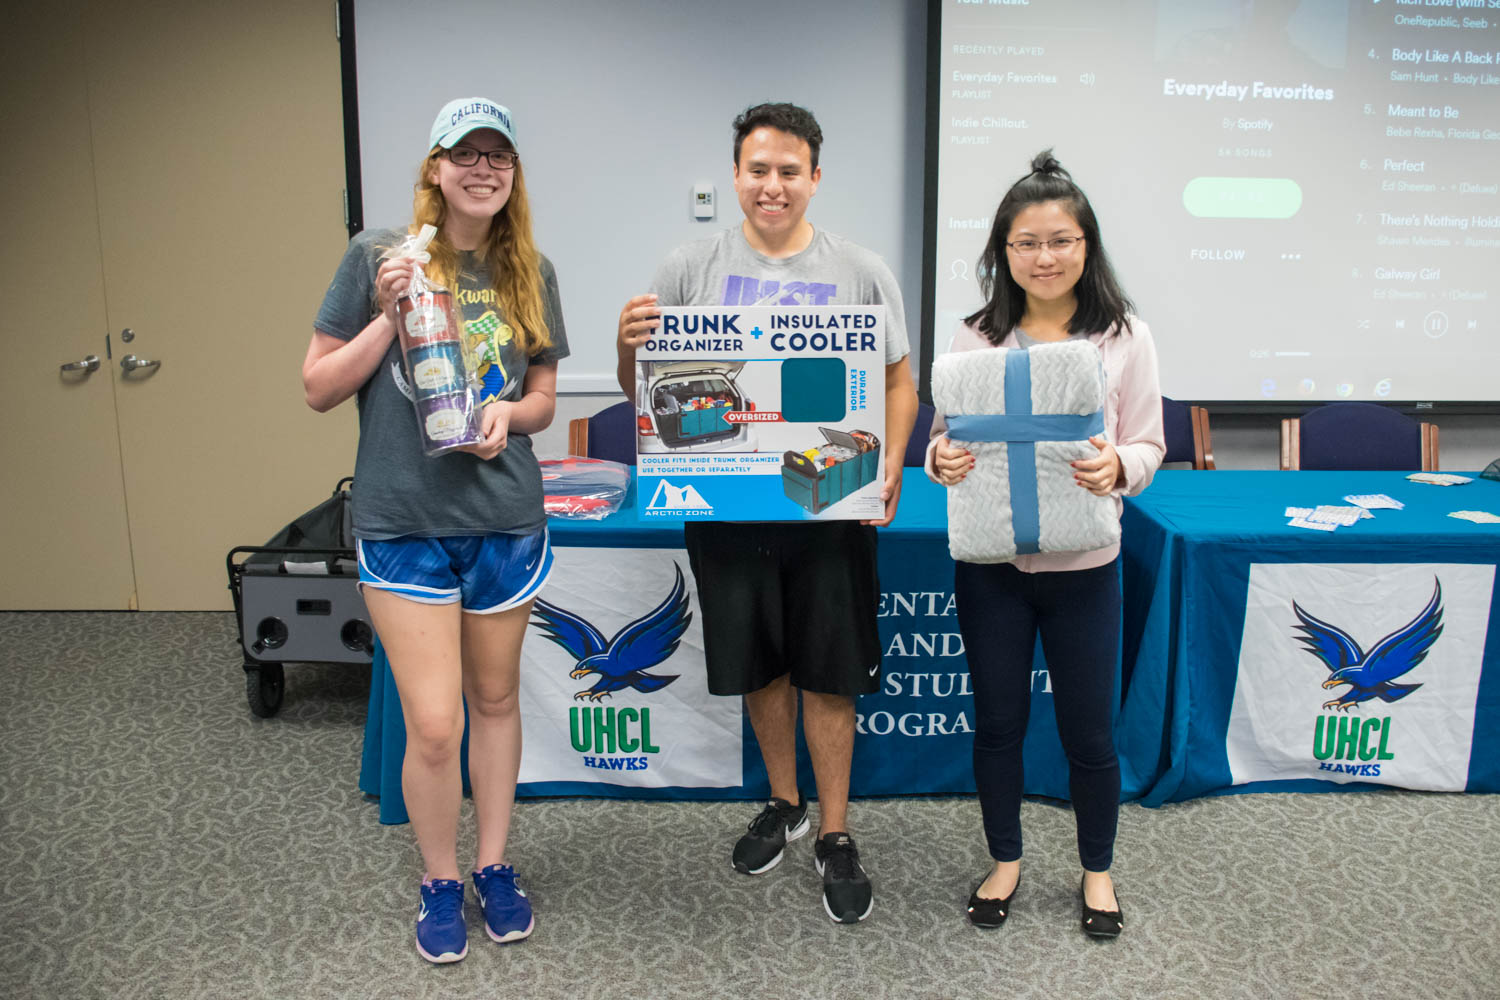 PHOTO: (from left to right) Lettisha Omo, standards officer for Delta Xi Nu, Rachel Liao, member of the Family Therapy Student Association, and Jesus Guadarrama, member of Bilingual Education Student Organization and Hawk leadership institute, holding their prizes and the 2017 Bingo and Breakfast event. Photo by Audience Engagement Coordinator Regan Bjerkeli.